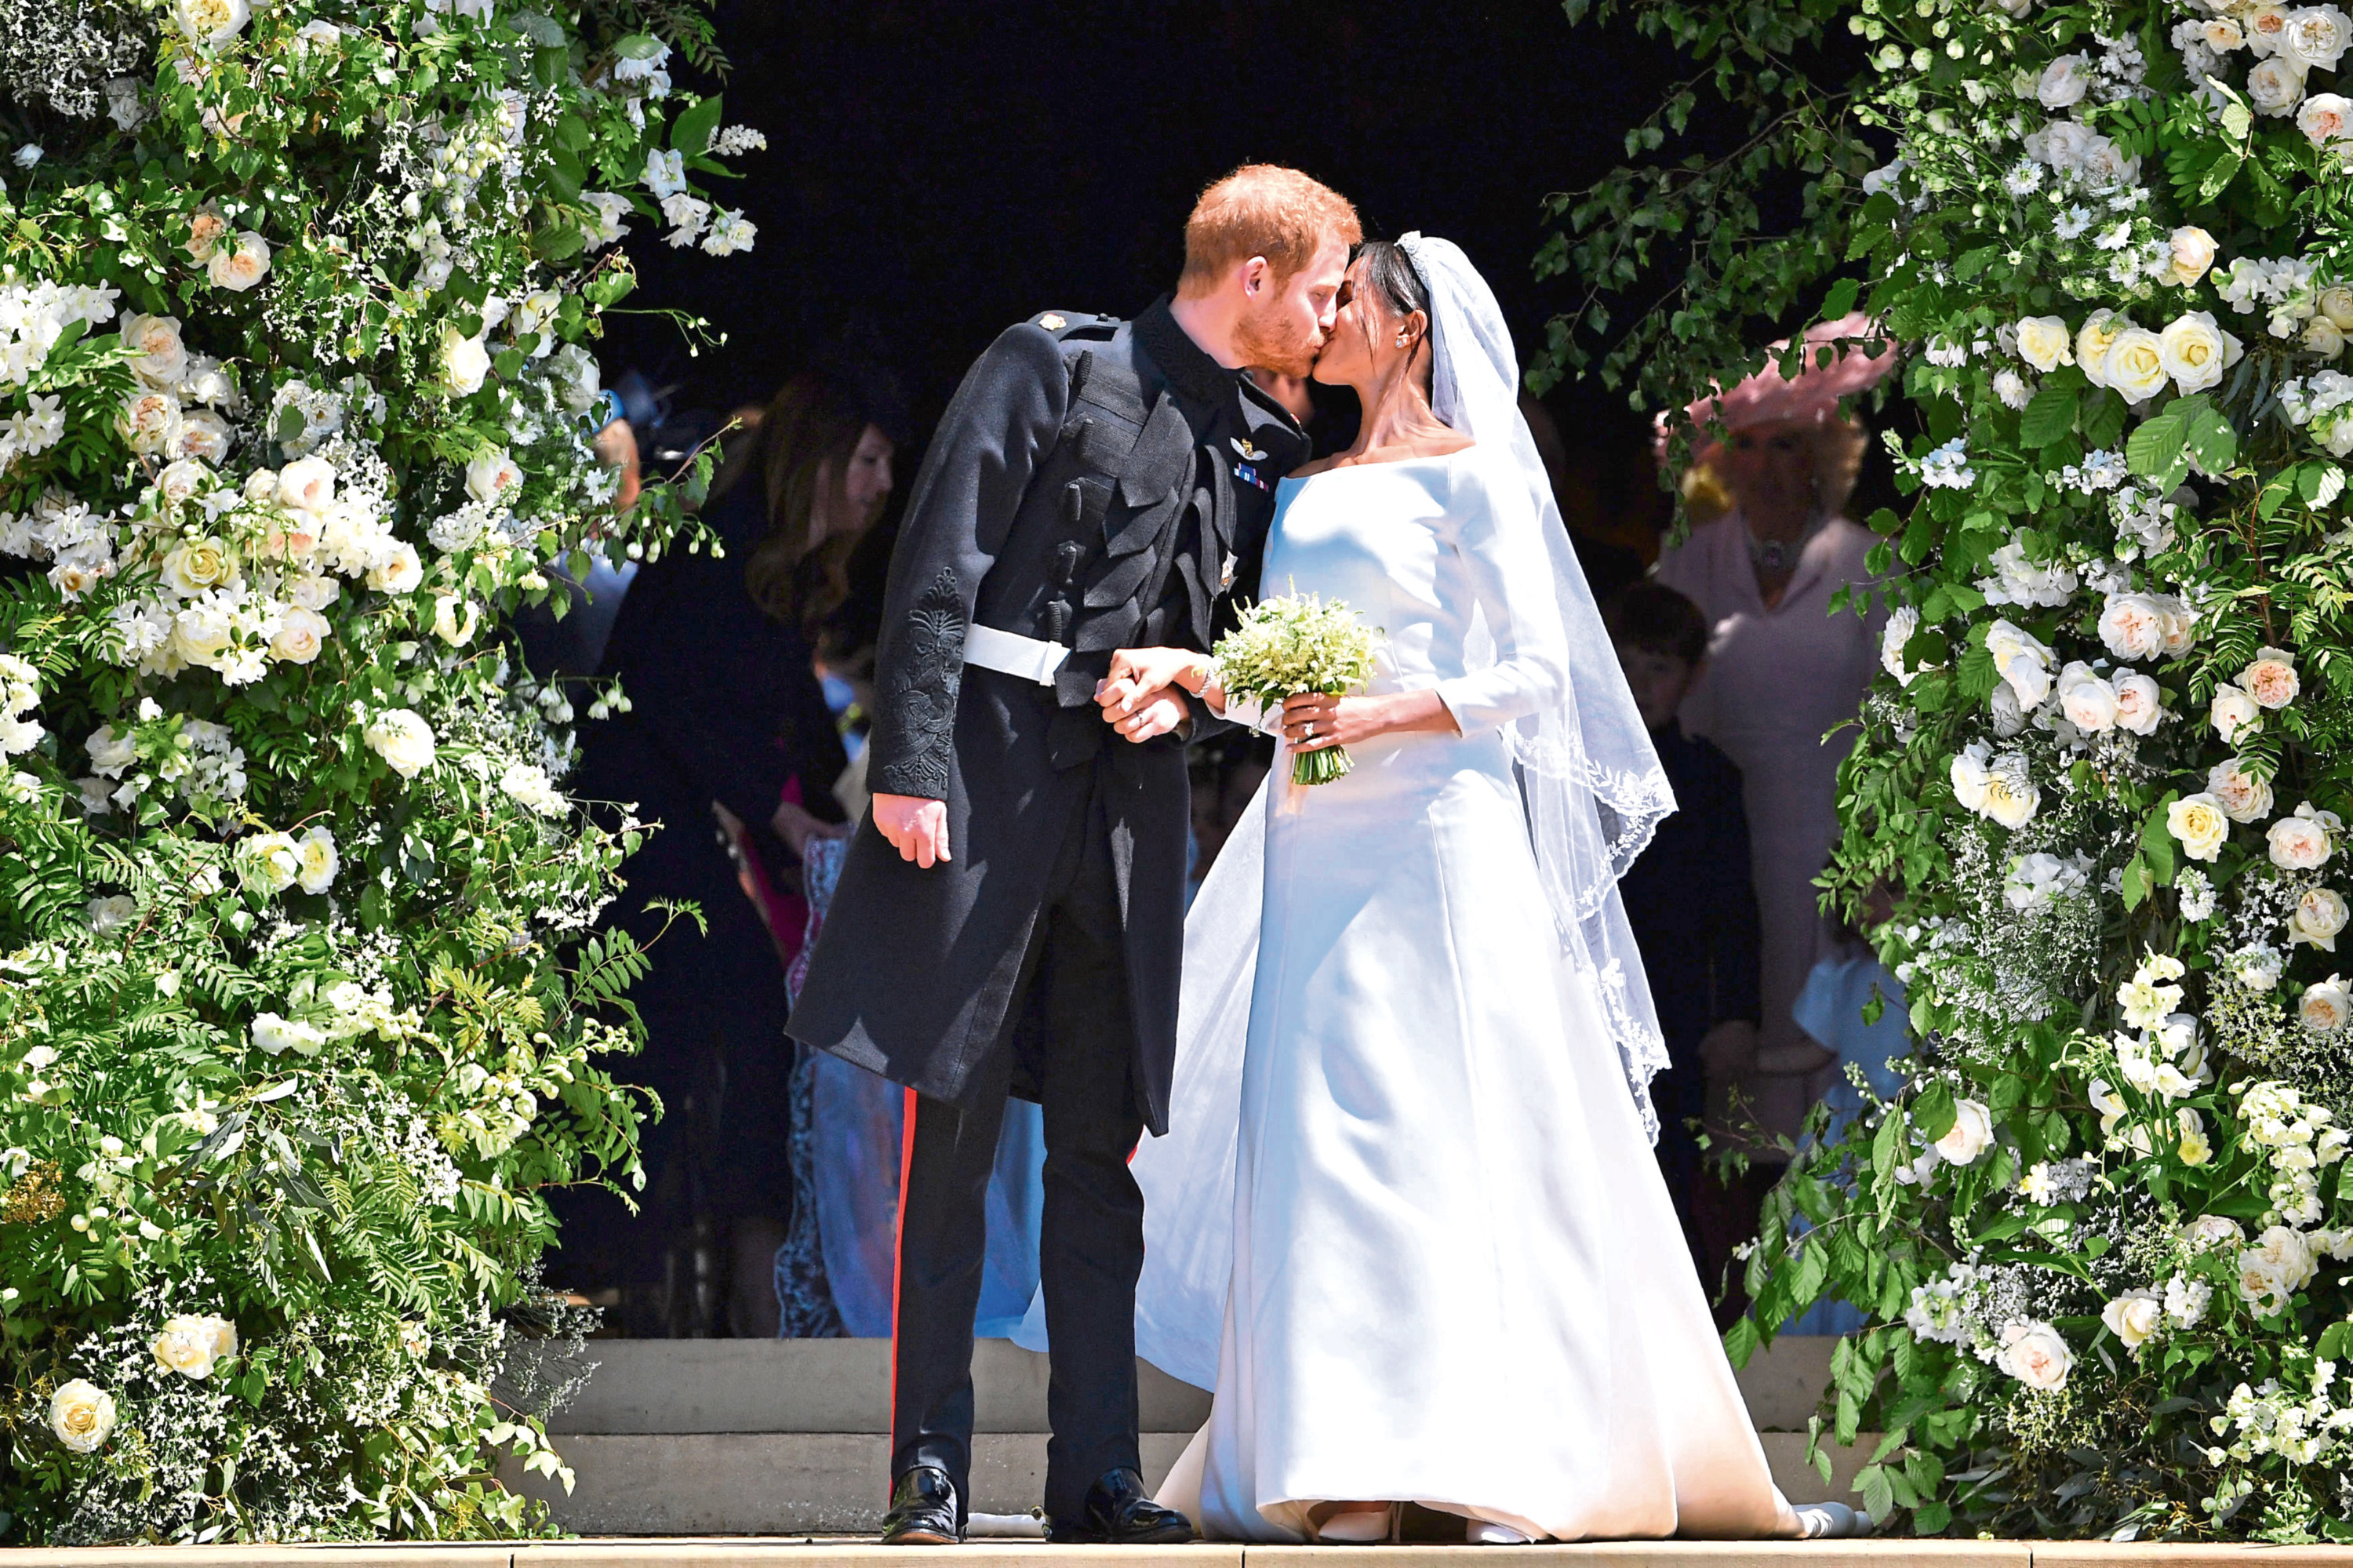 Prince Harry and Meghan Markle kiss as they leave at St. George's Chapel in Windsor Castle after their wedding.